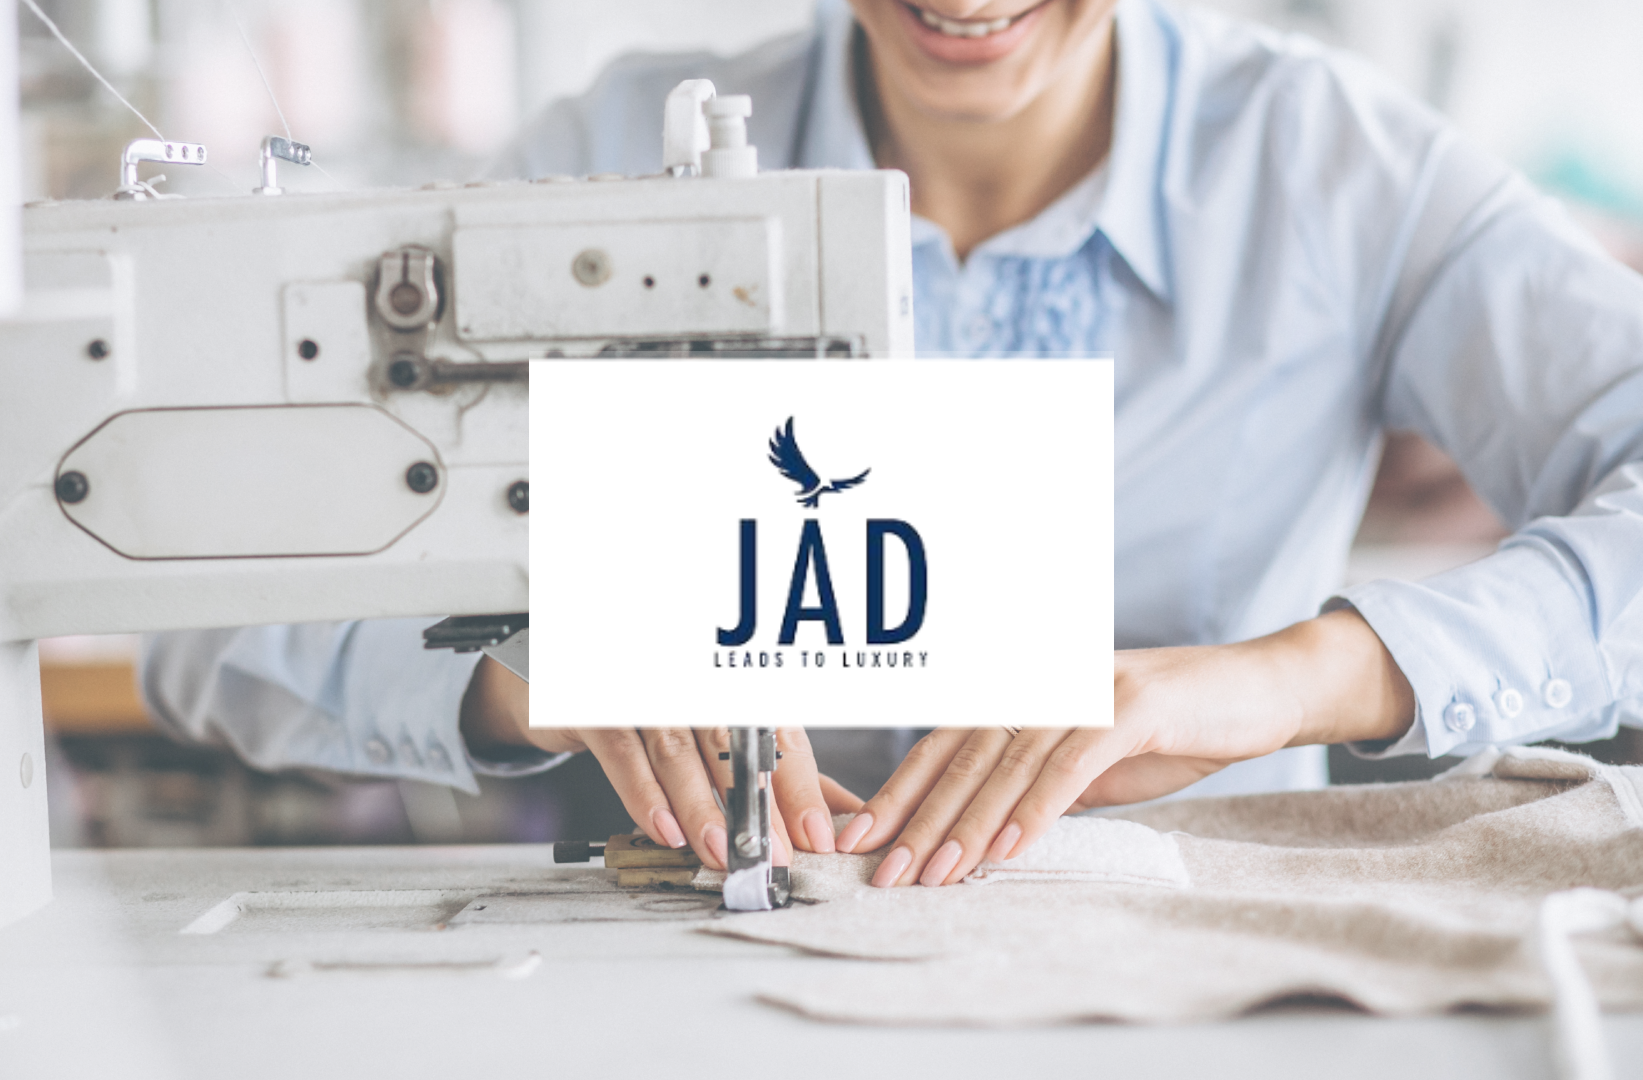 AD: Weaving Success with Technaureus ERP - Empowering Tailoring and Textiles Through Streamlined Operations and Customized Solutions